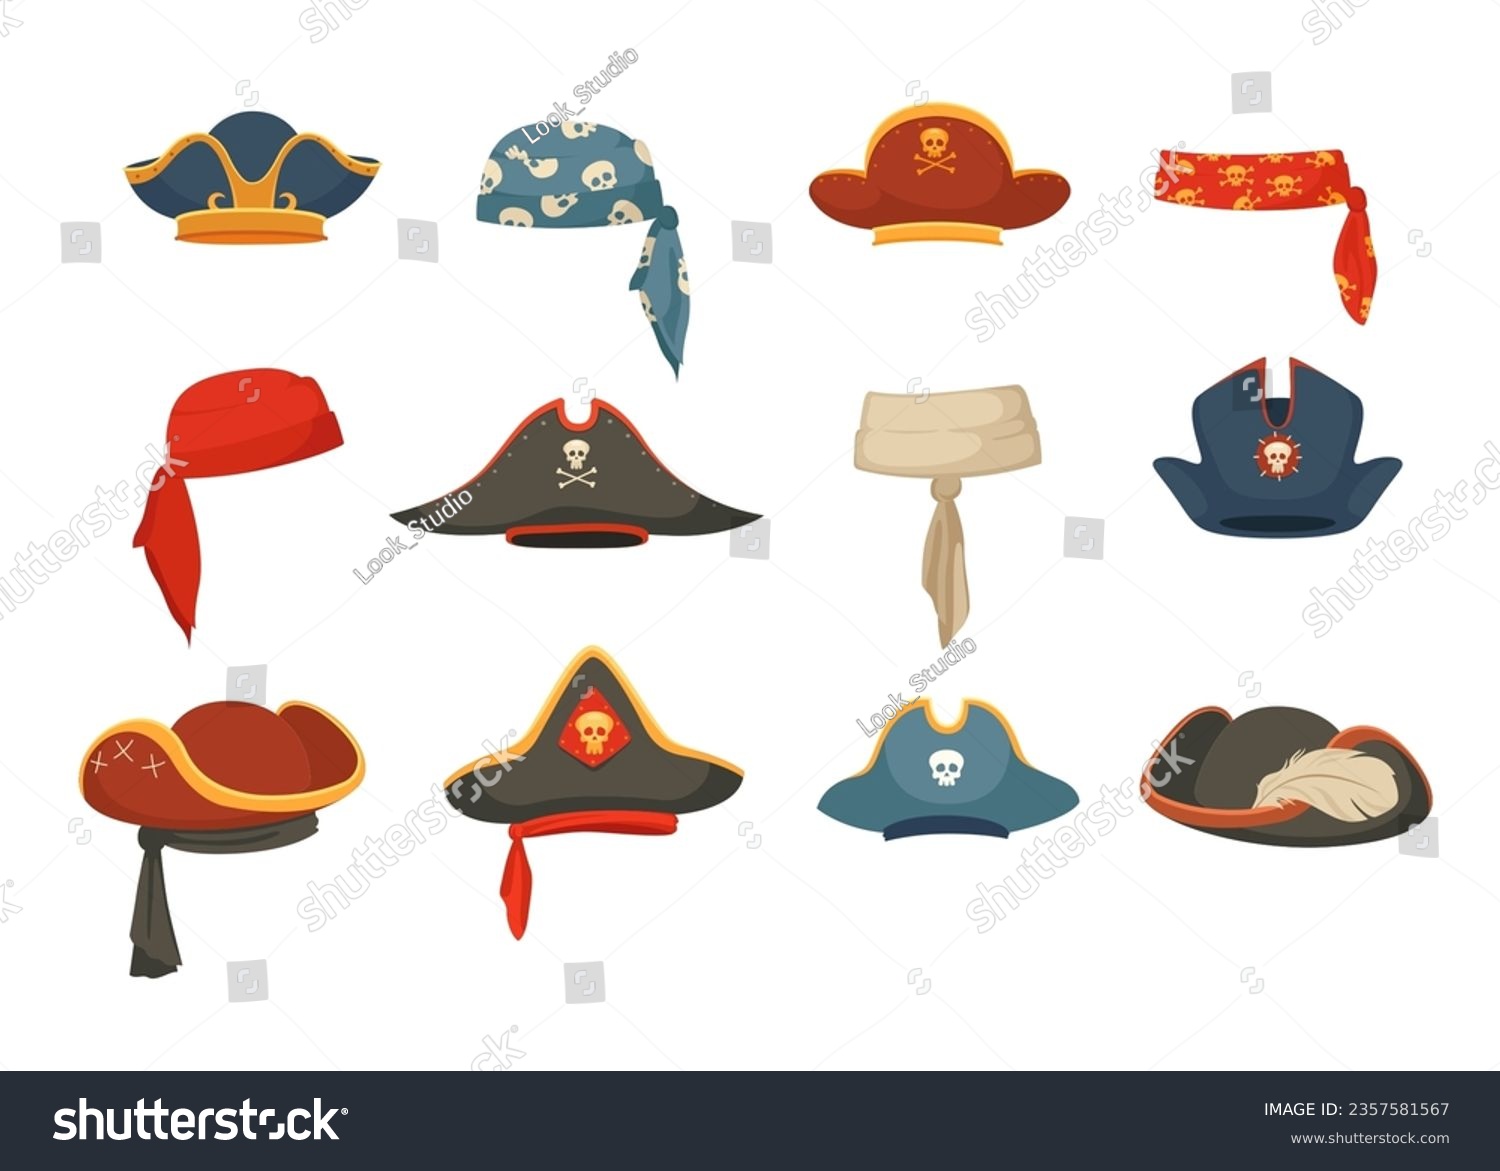 SVG of Corsair headgear, pirate hats, buccaneer bandana costume isolated set isolated on white background. Filibuster headdress, sea sailor cap festive clothes accessory for children vector illustration svg